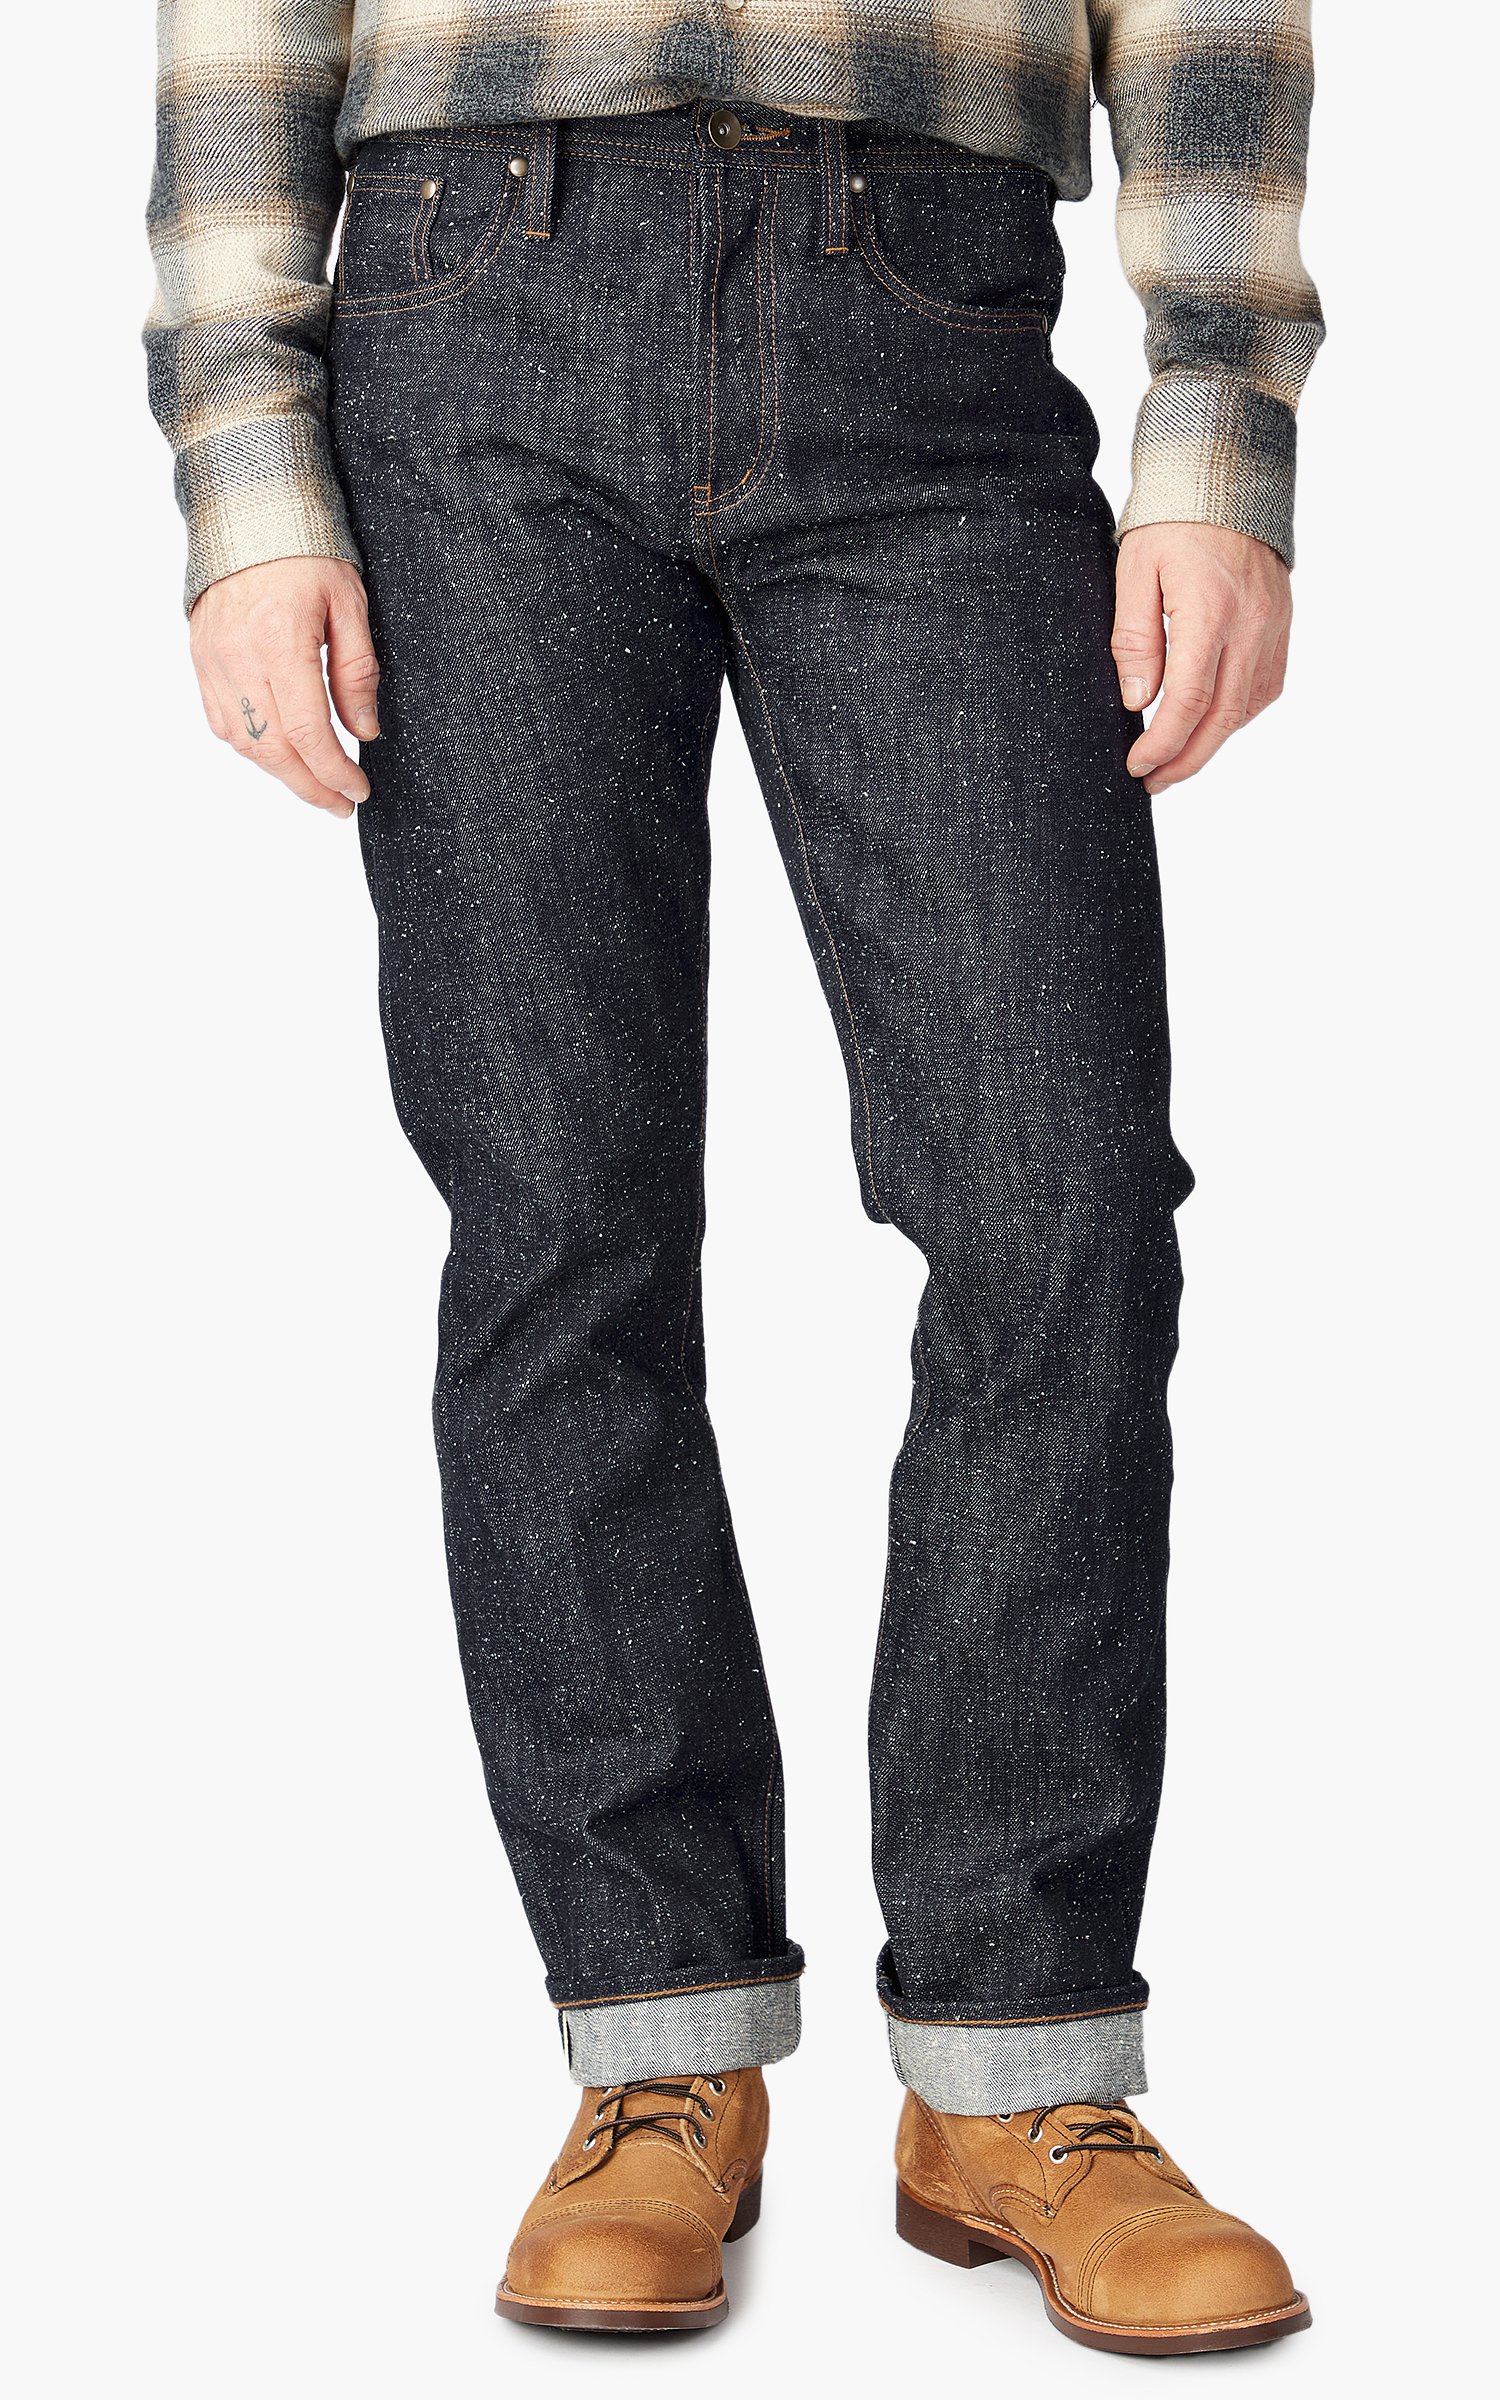 The Unbranded Brand UB343 Straight Fit Heavyweight Neppy Selvedge 18oz